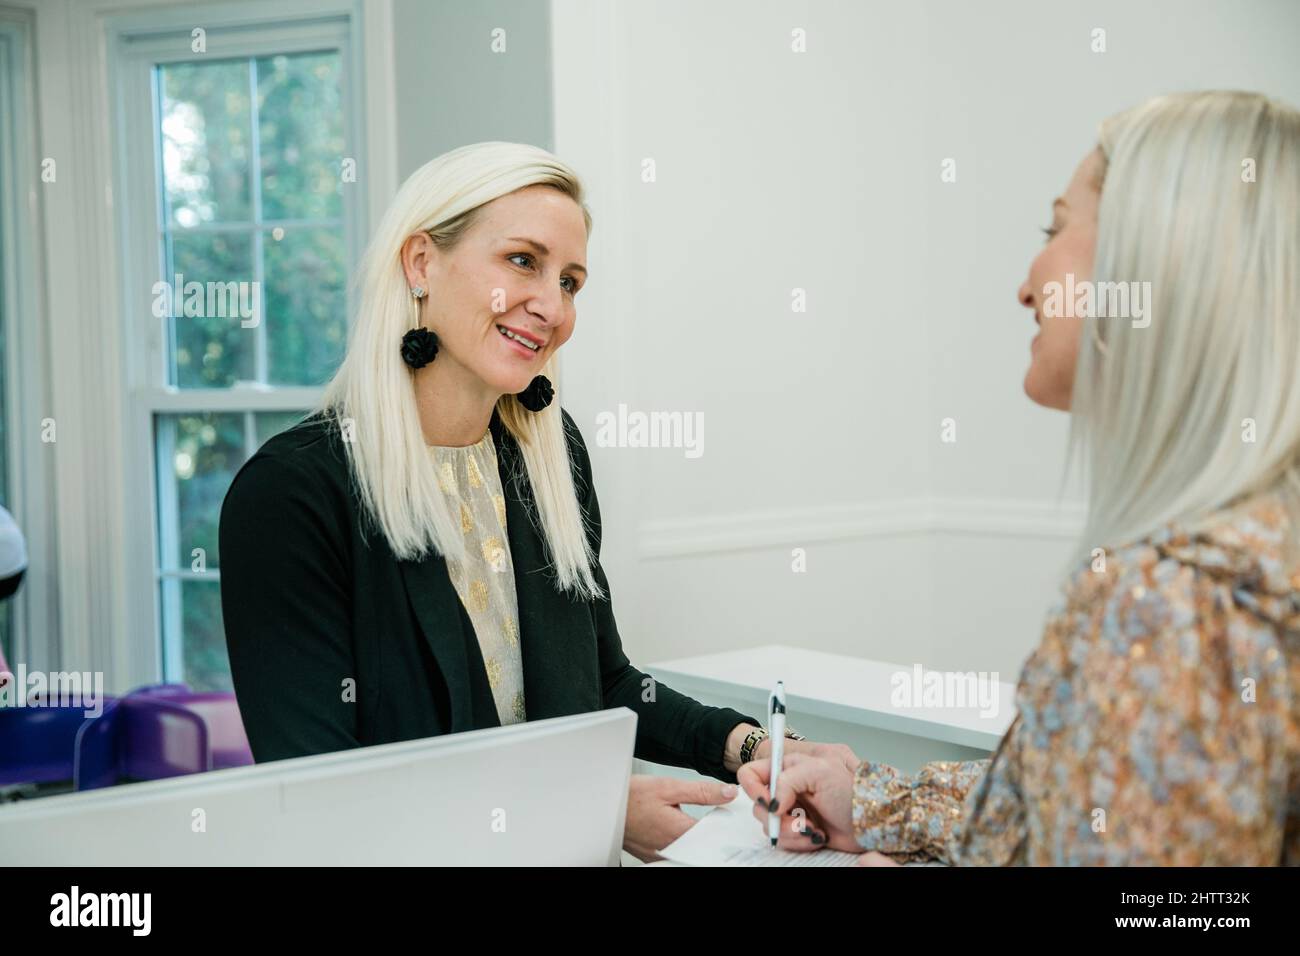 A small business owner checking in a guest client at a wellness spa Stock Photo